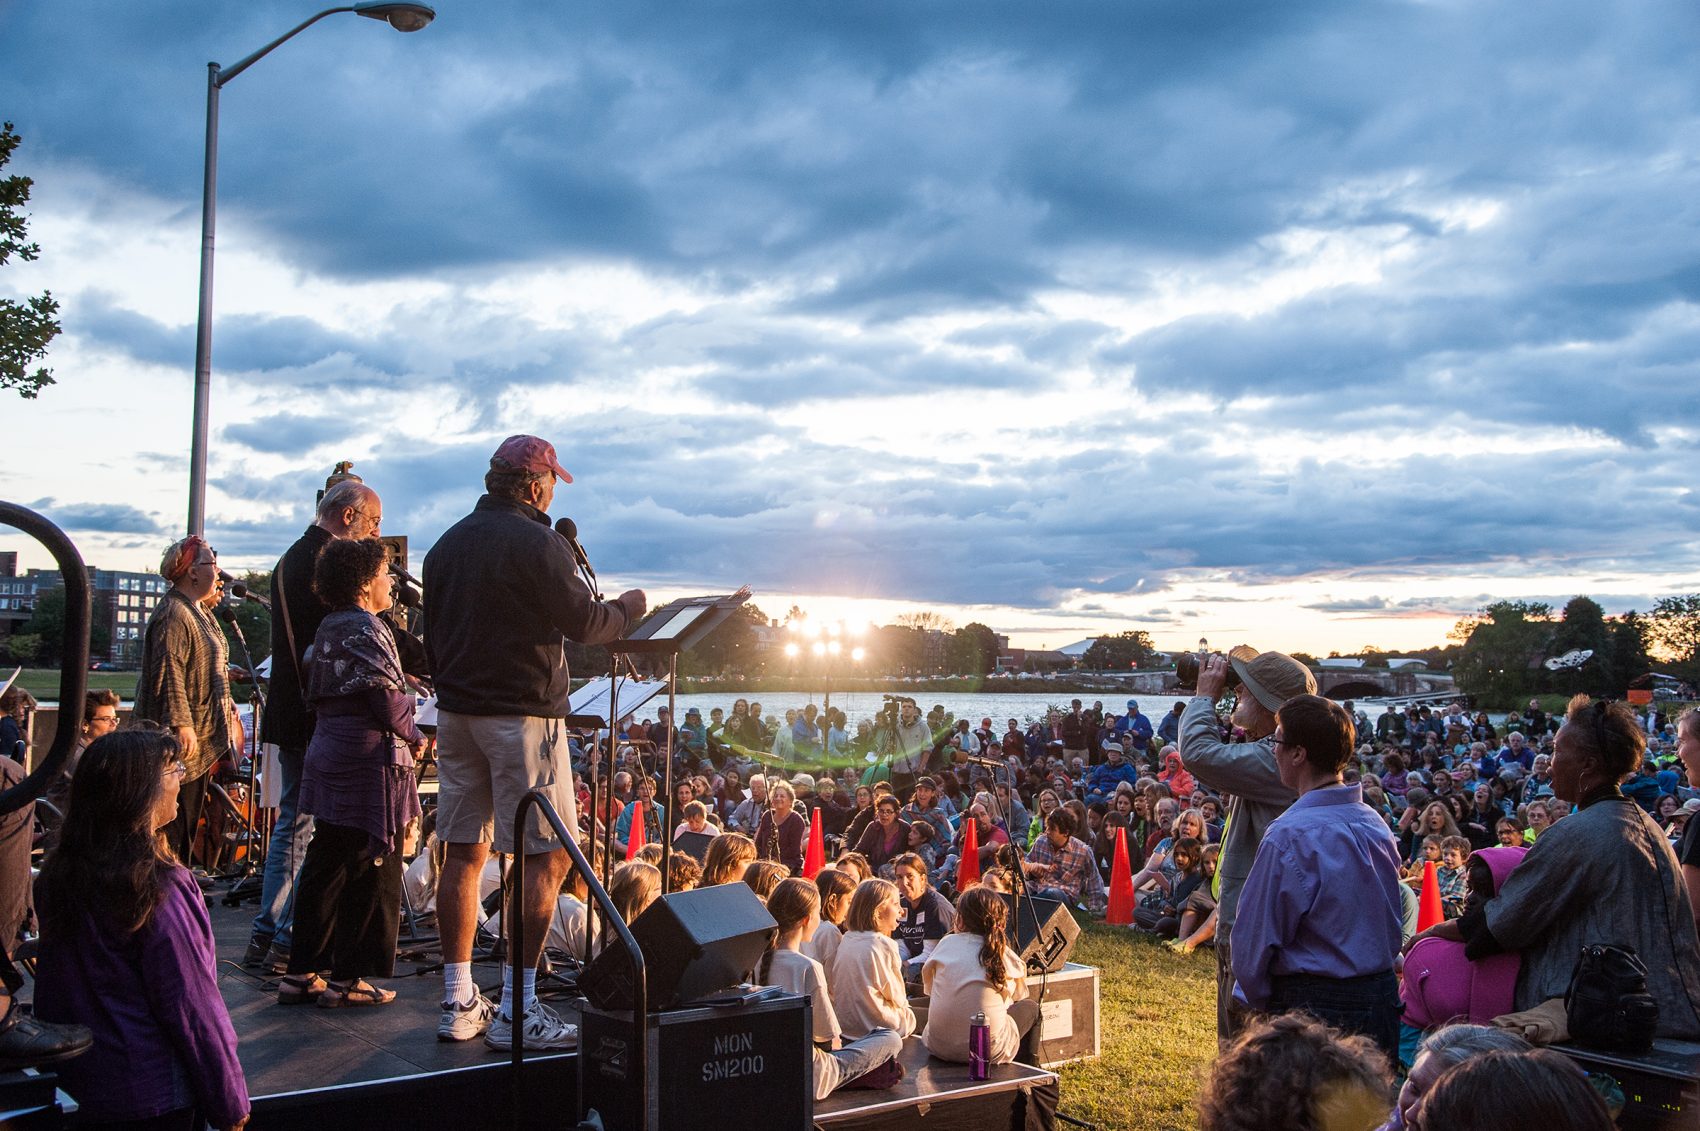 The crowd at RiverSing in 2013. (Courtesy Revels)